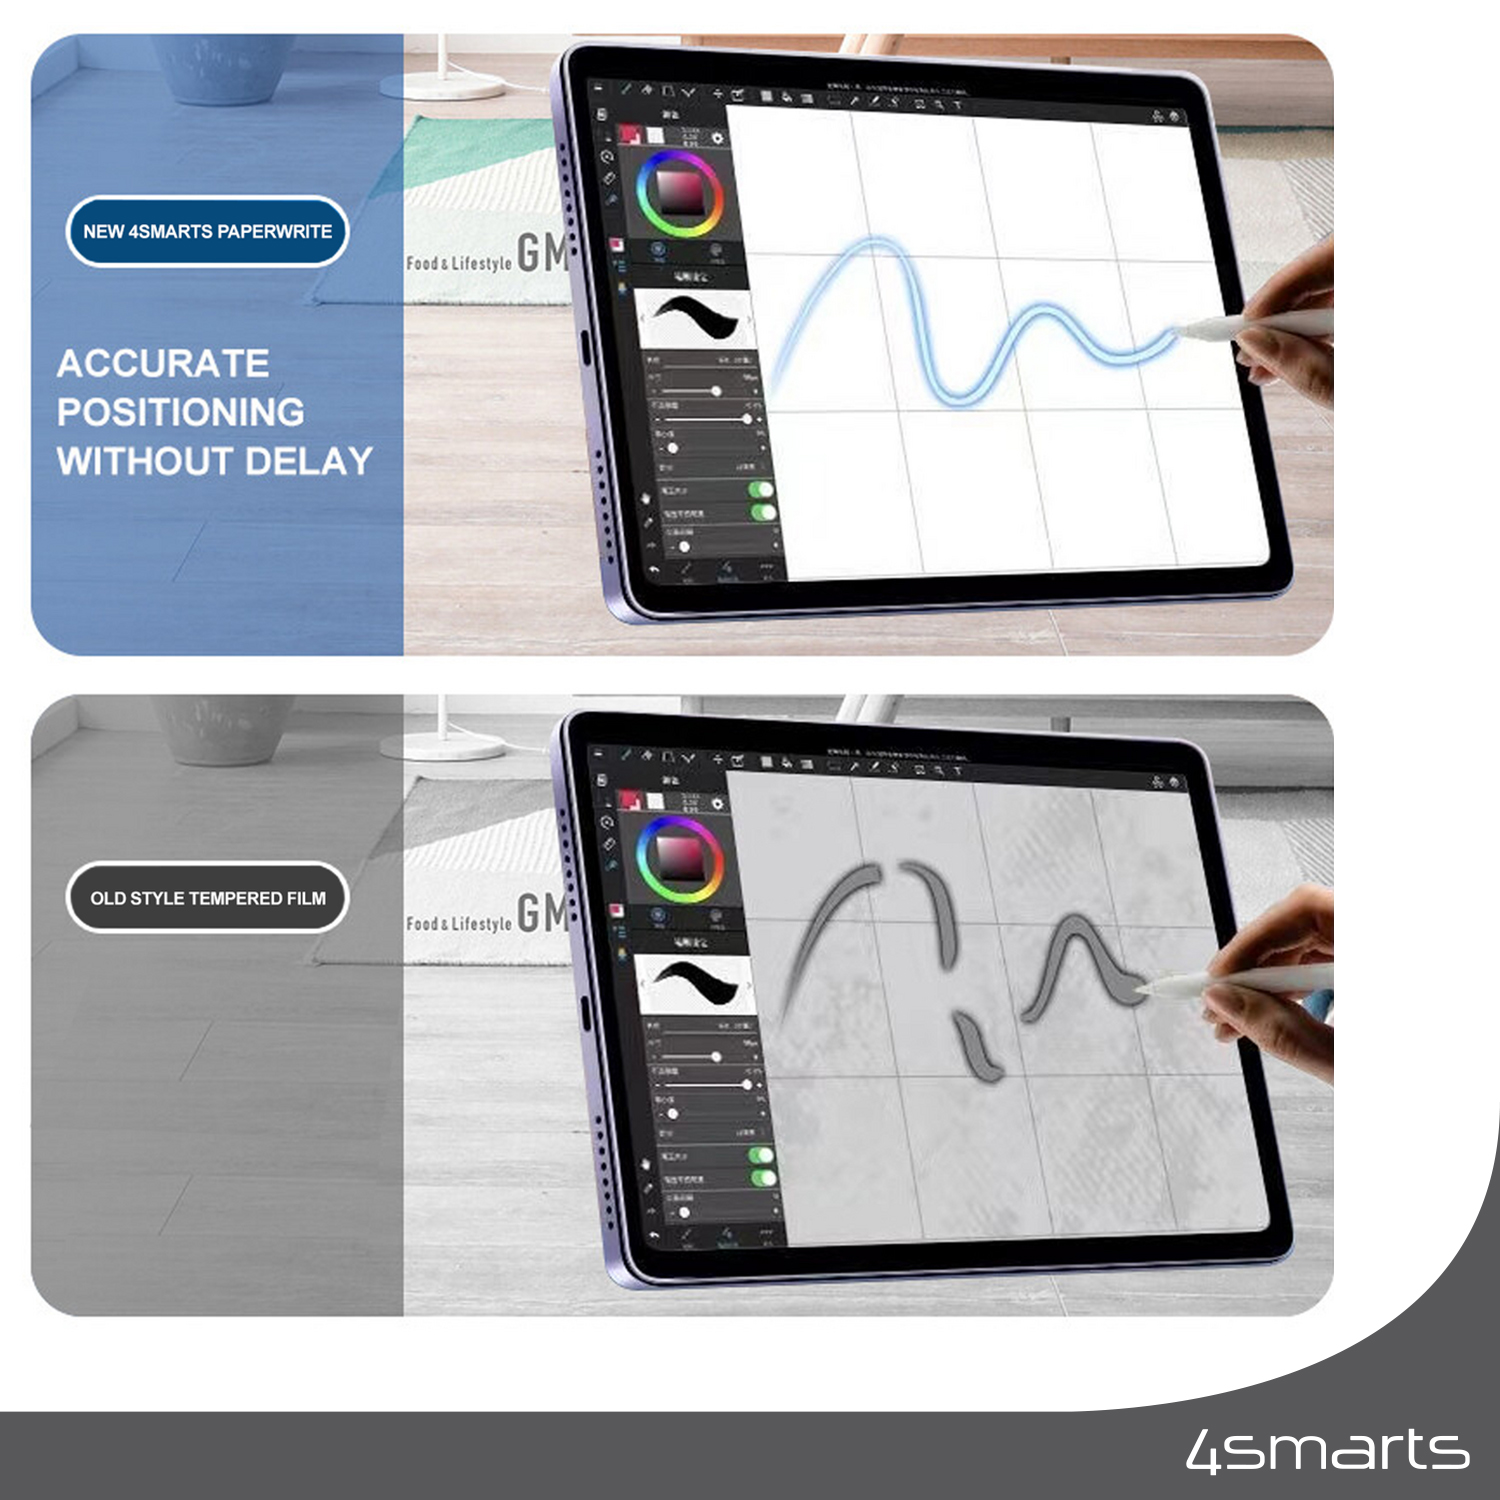 The 4smarts Paperwrite anti glare iPad screen protector ensures a long life of your display.